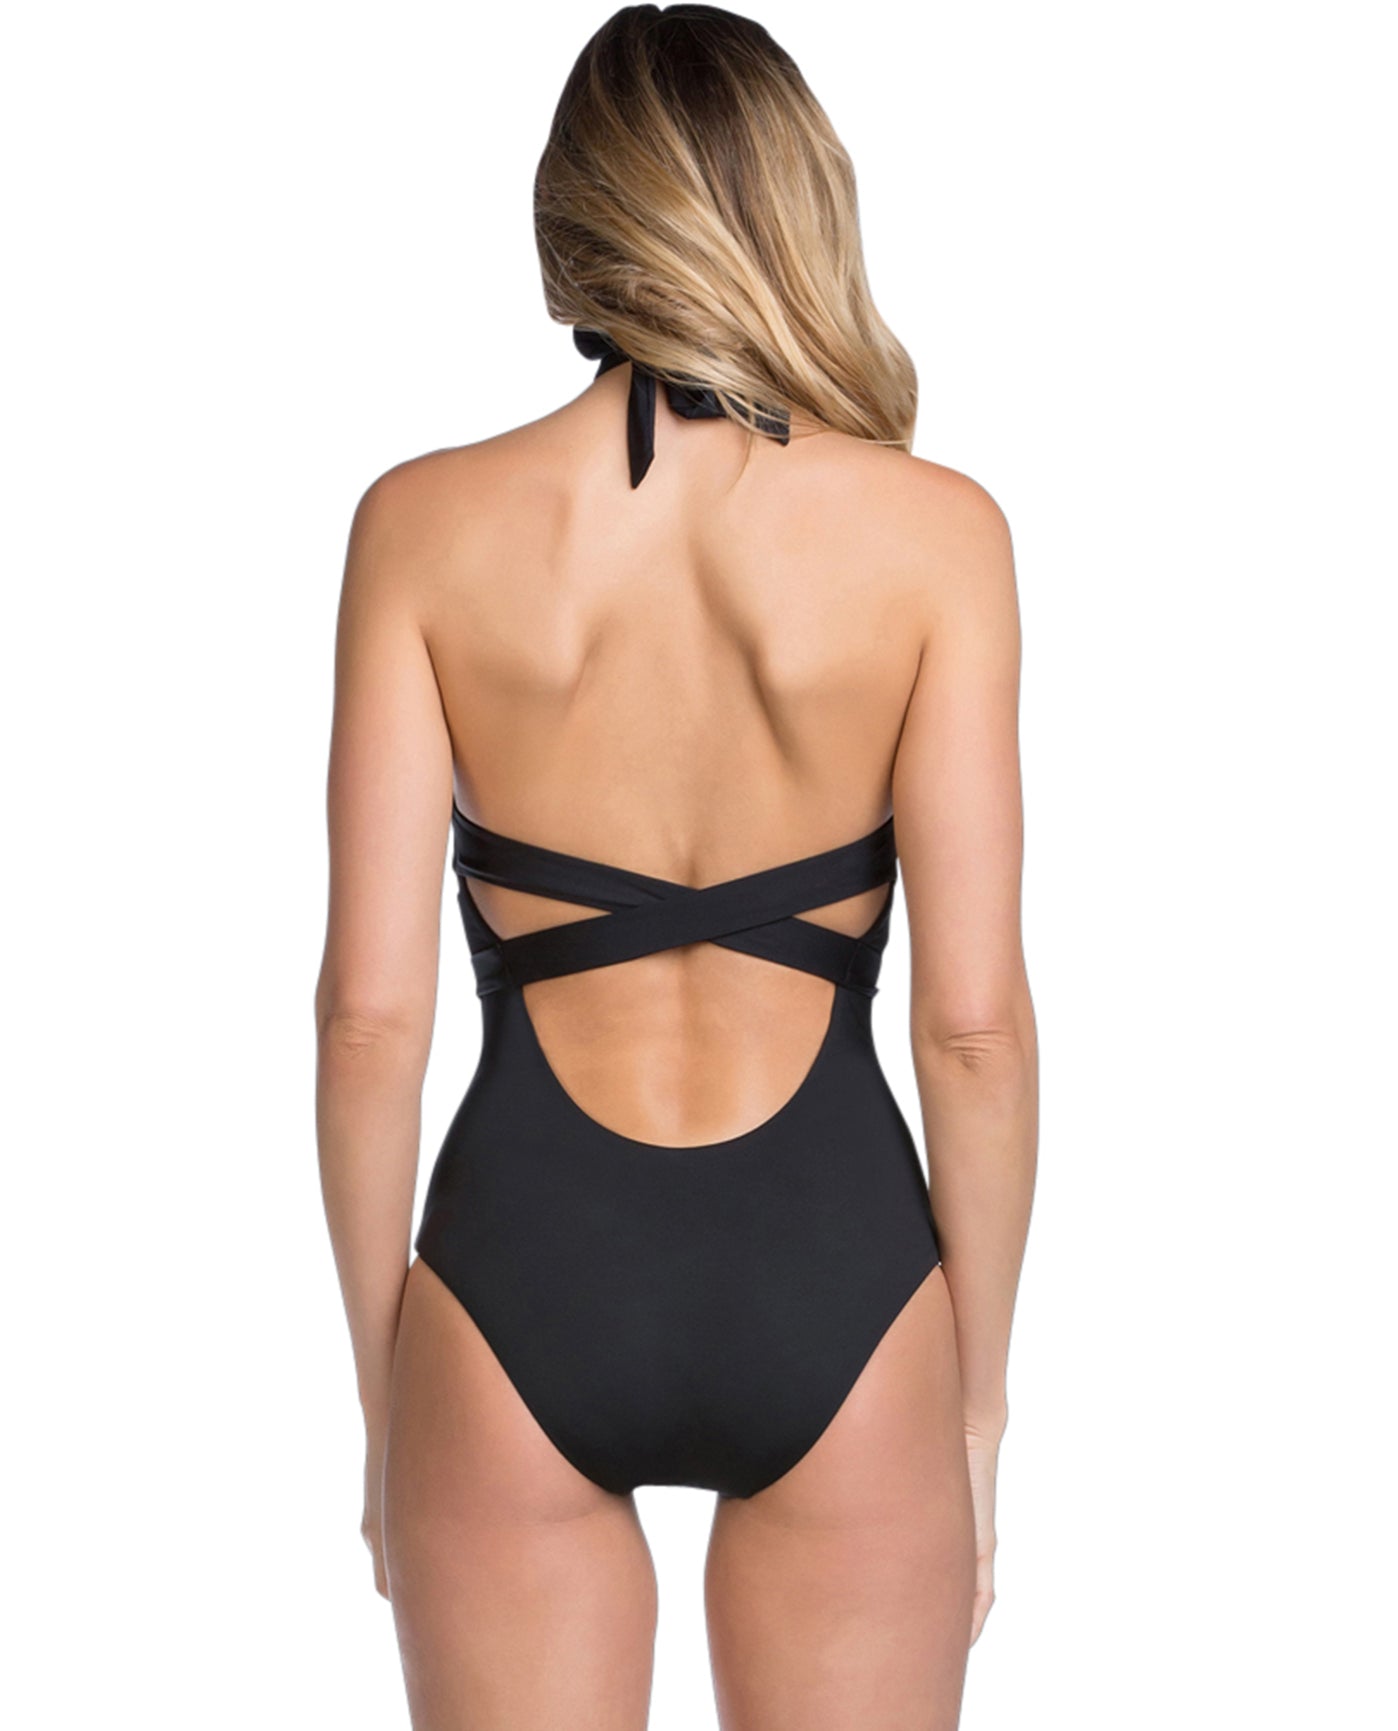 Back View Of Becca by Rebecca Virtue Black Socialite High Neck Plunge Sash One Piece Swimsuit | BEC Black